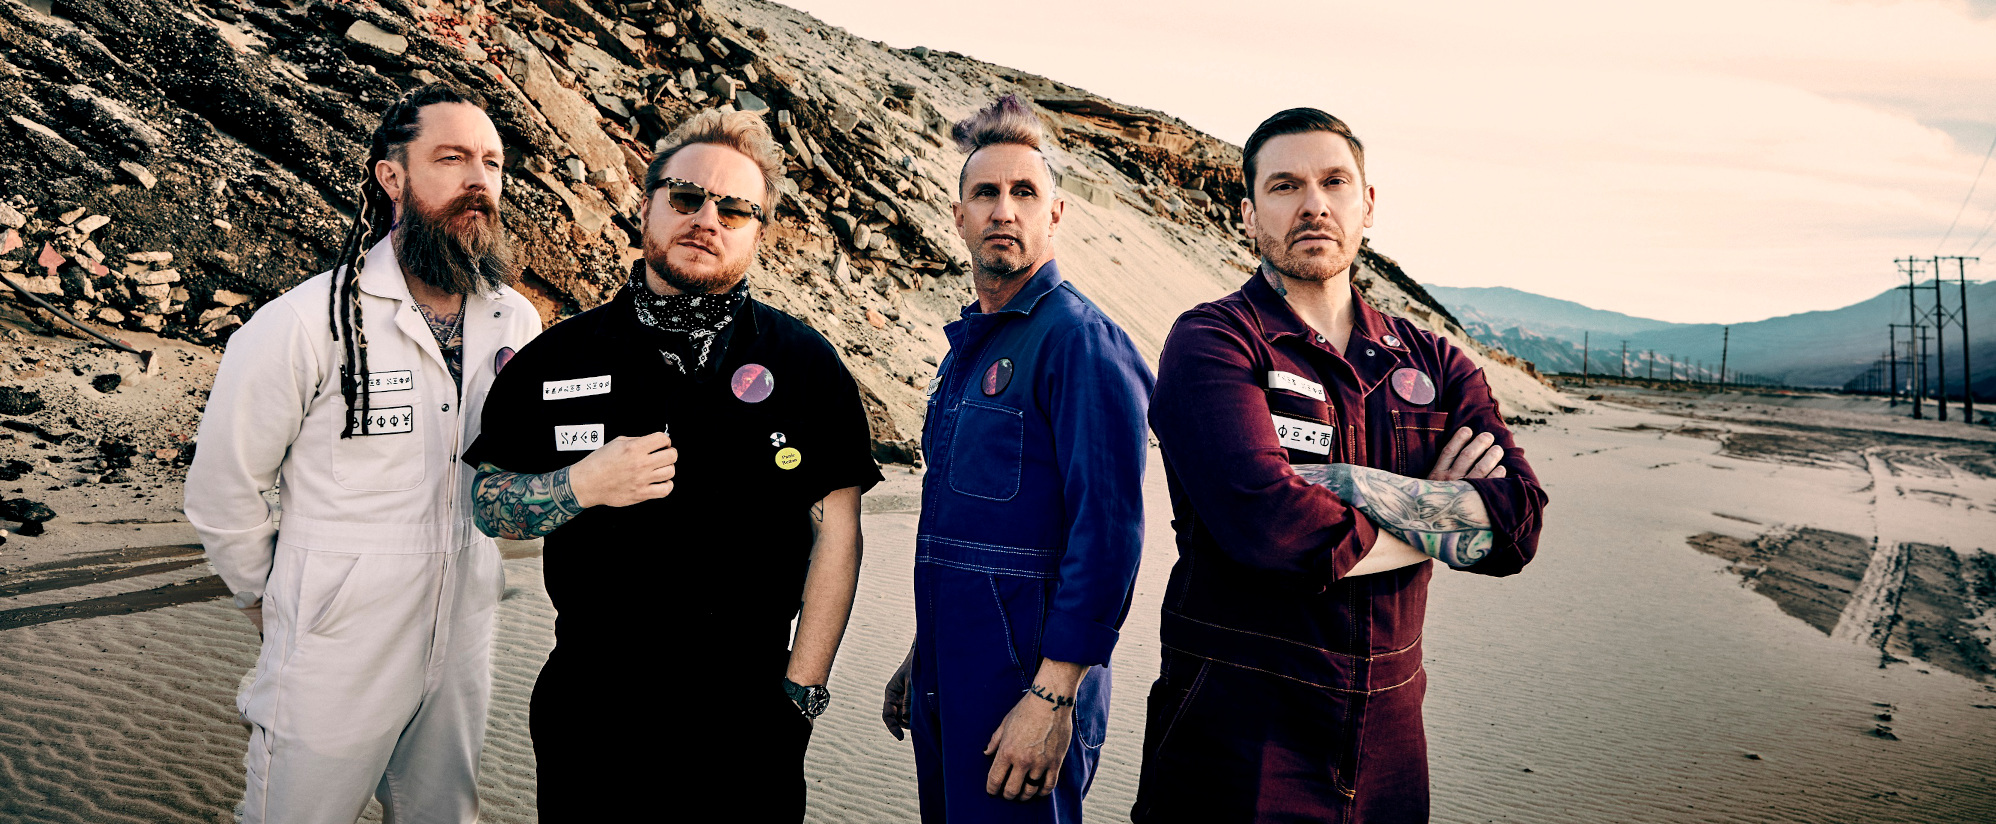 Brent Smith of Shinedown Just Wants Honesty, Debuts New Single “Planet Zero”